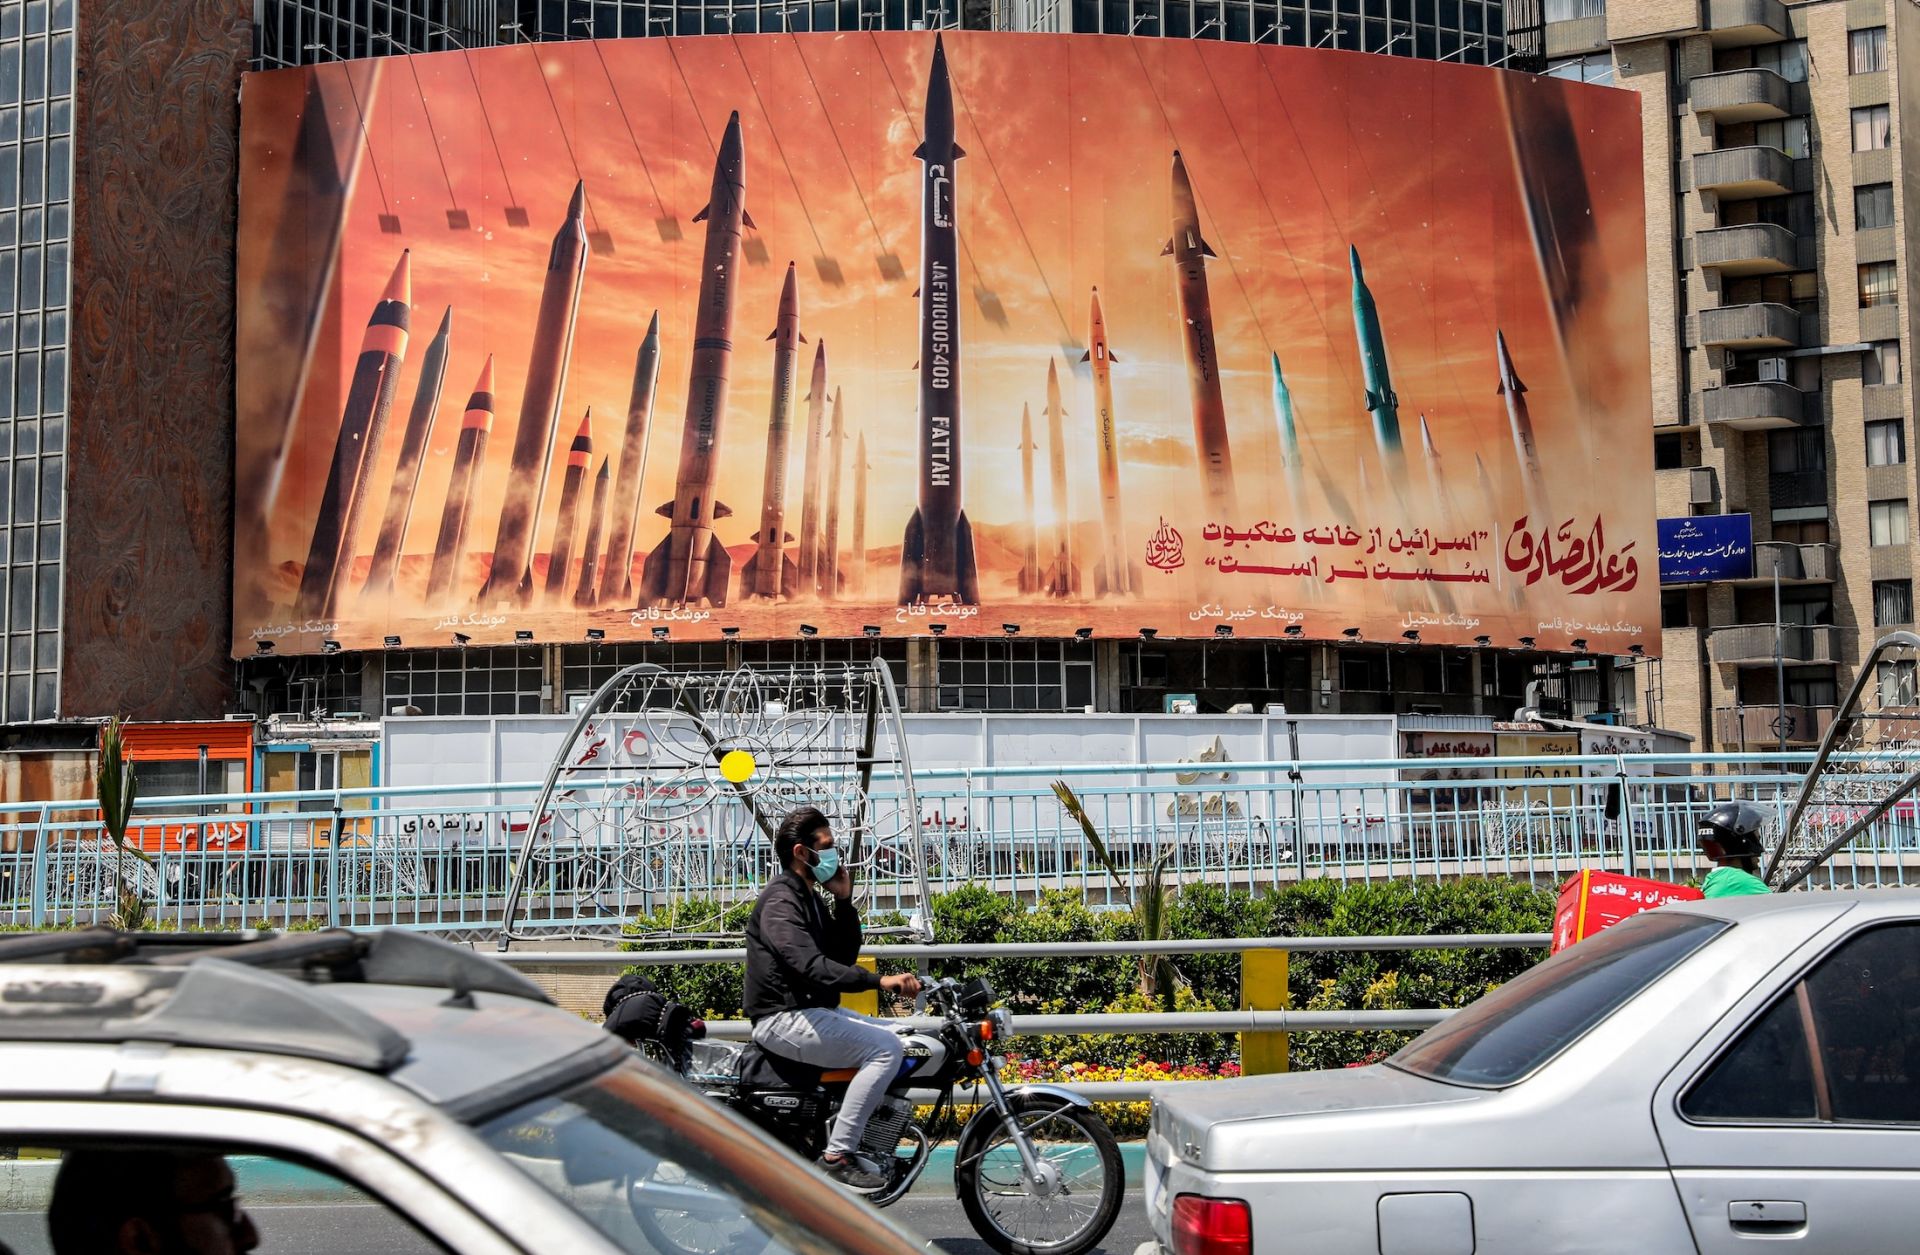 A banner depicts IRGC missile models aimed at Israel on April 16 in the Iranian capital of Tehran.